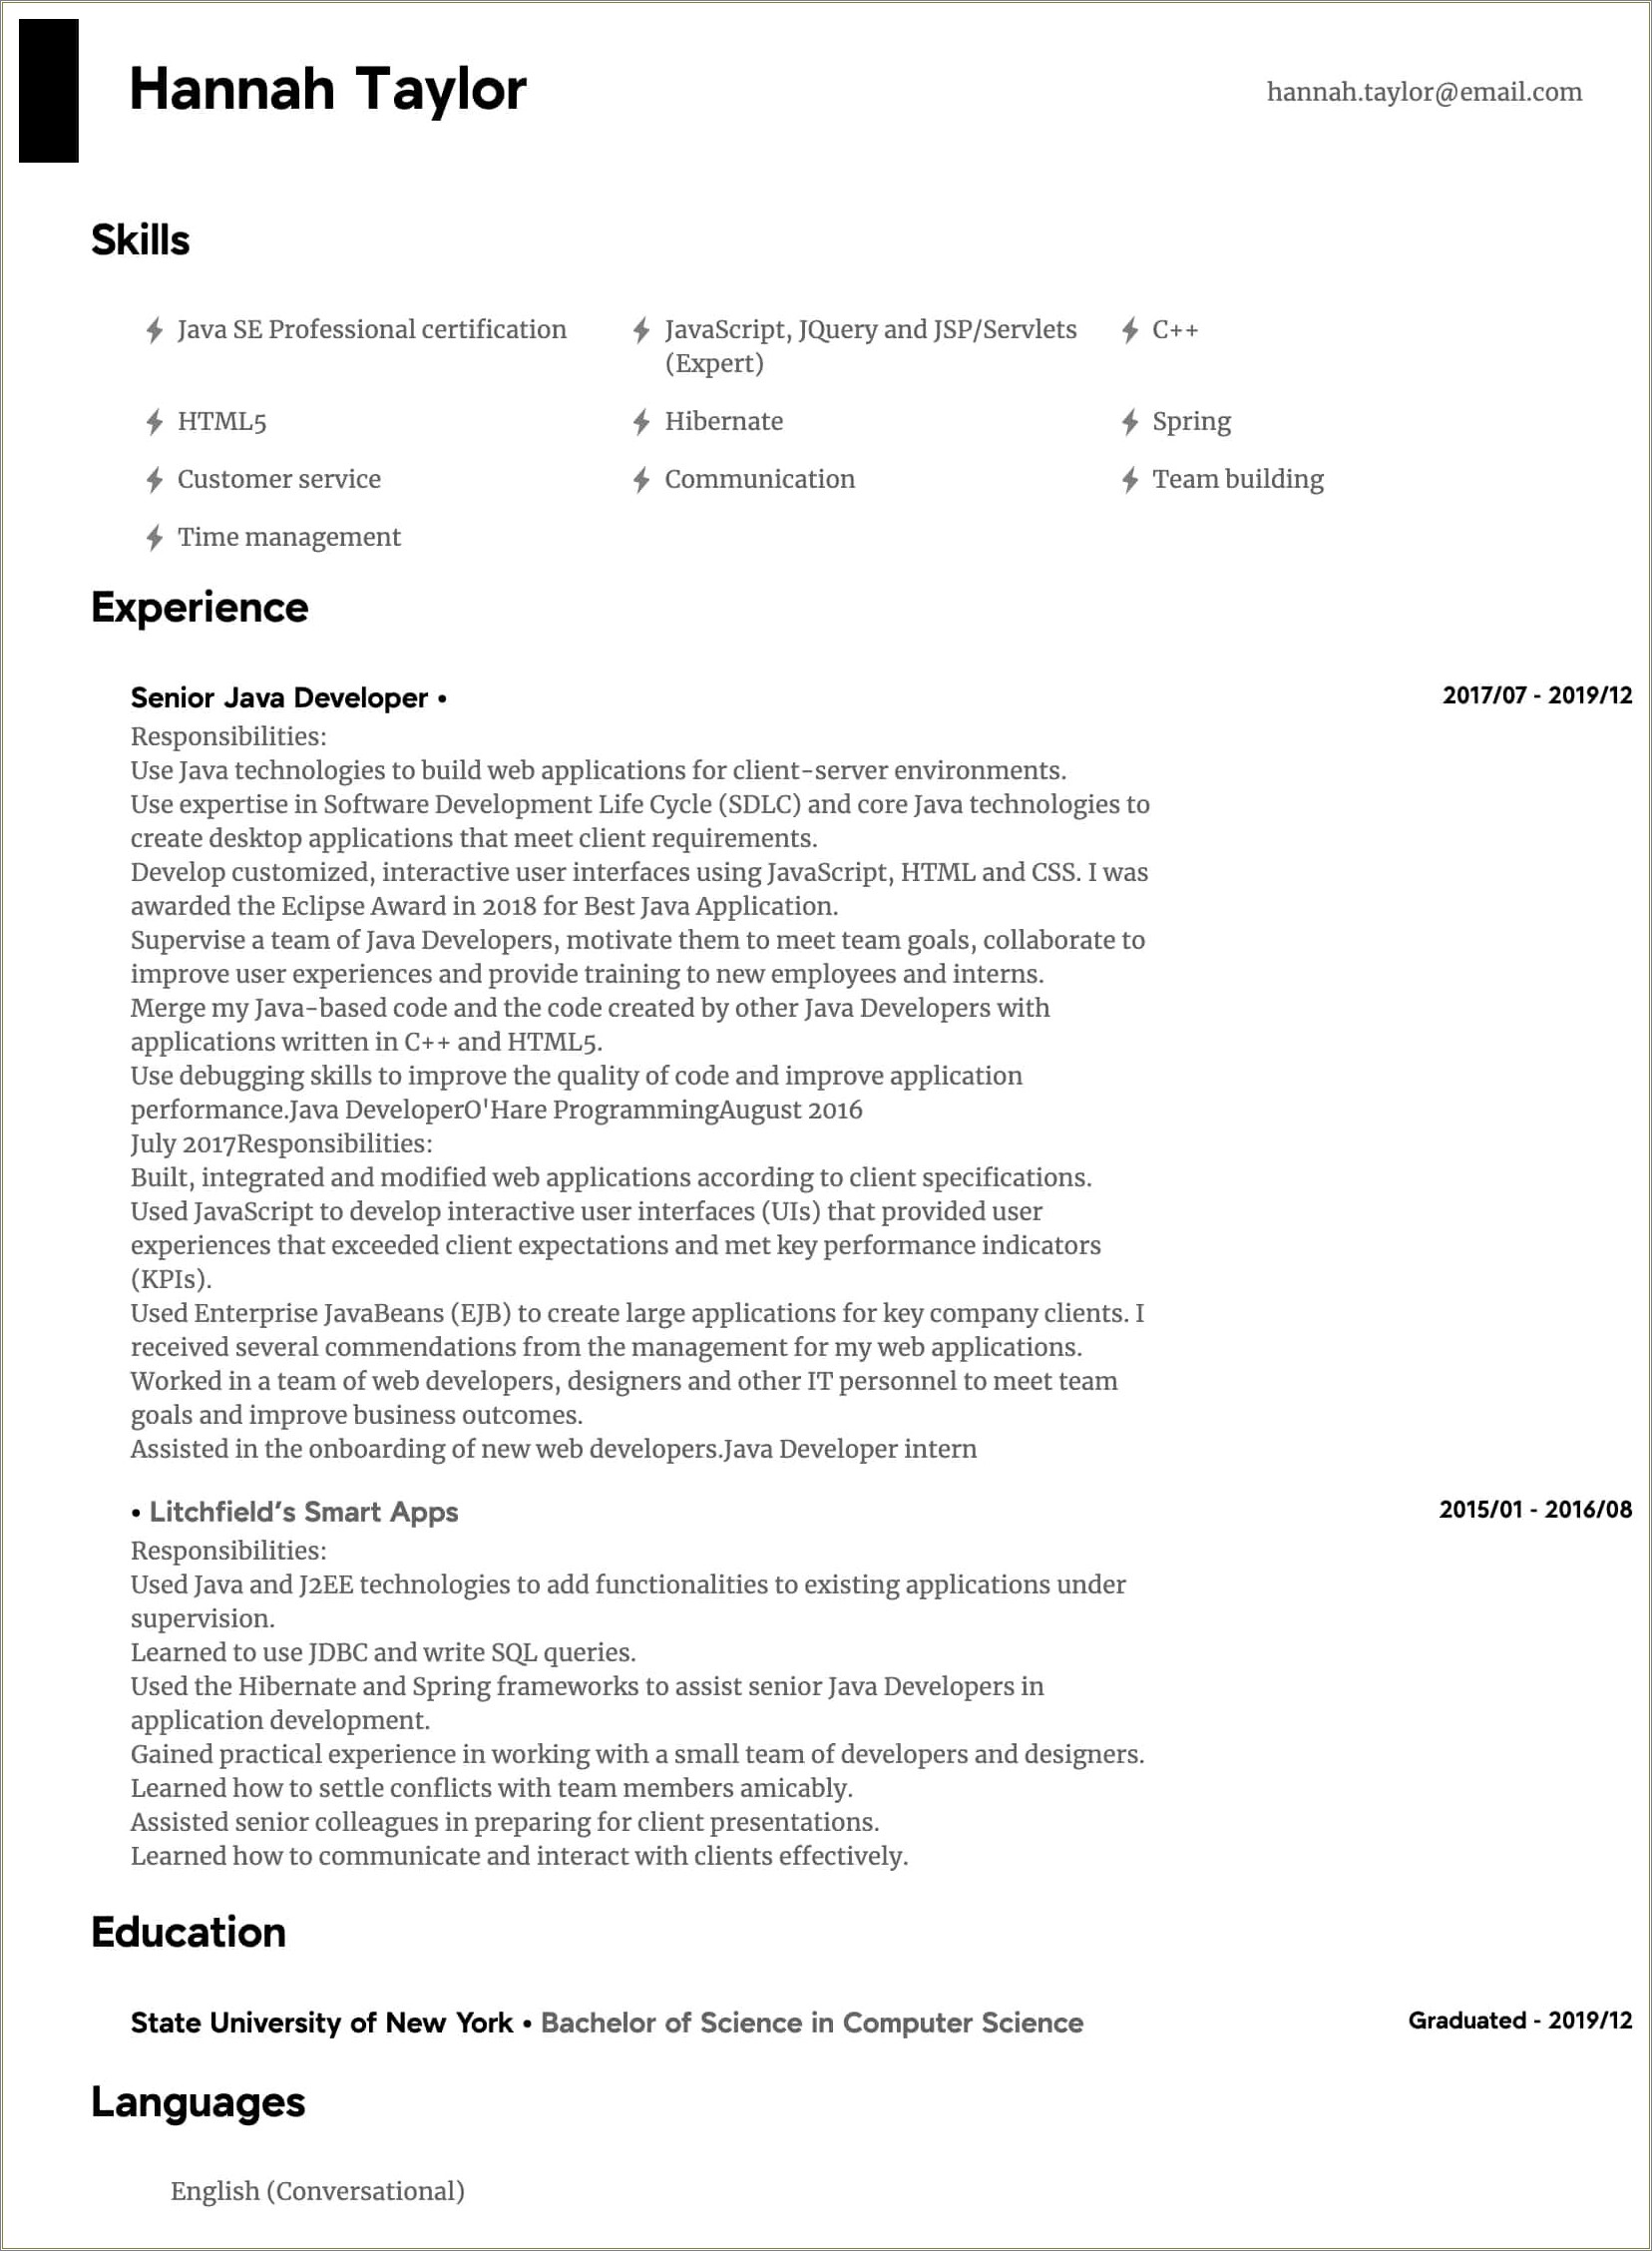 Resume Format For 3 Years Experience In Java